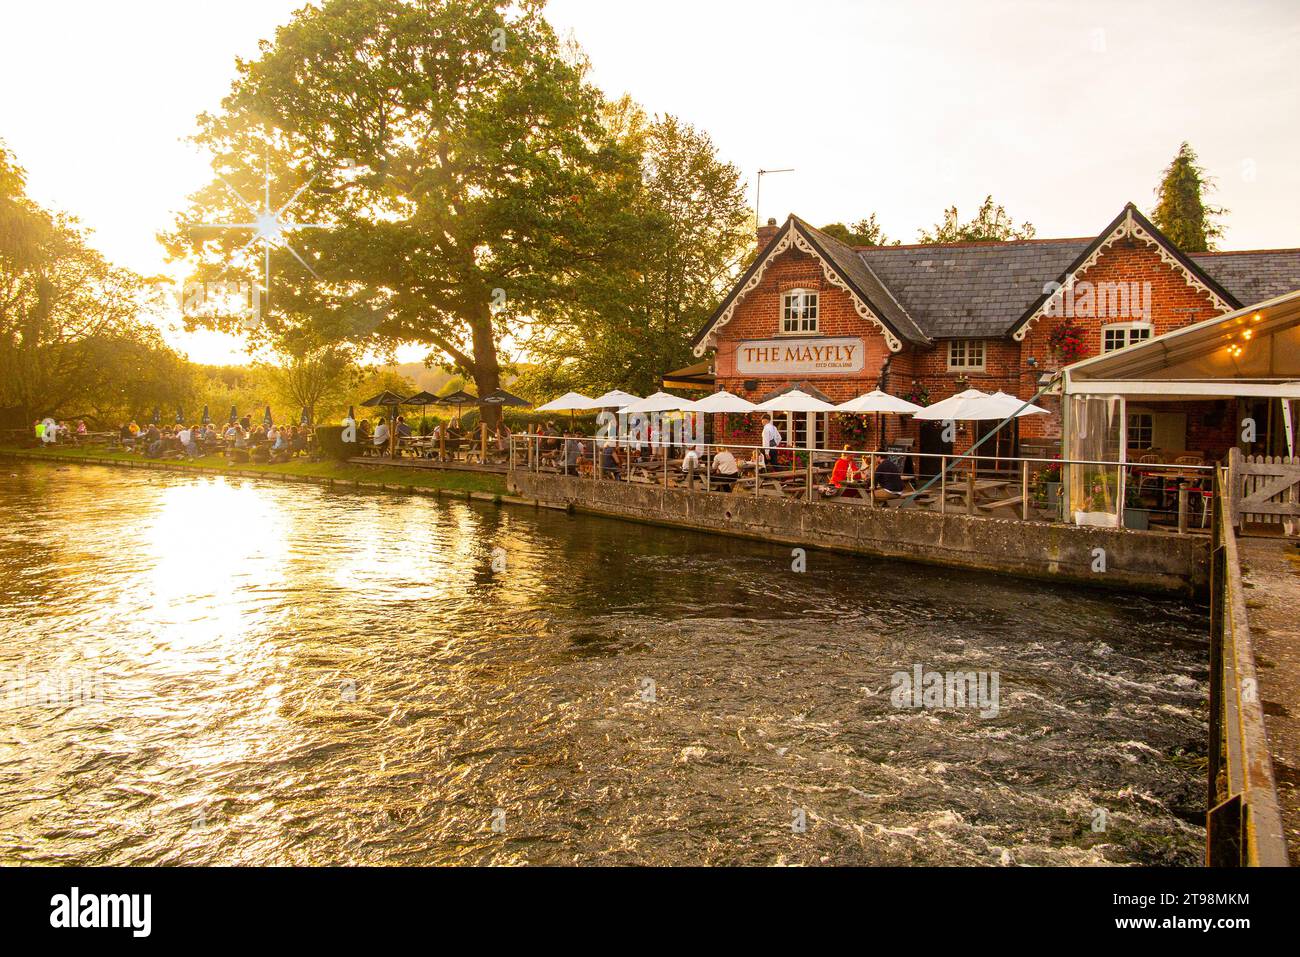 The famous Mayfly Pub on the banks of the River Test in Hampshire, England Stock Photo